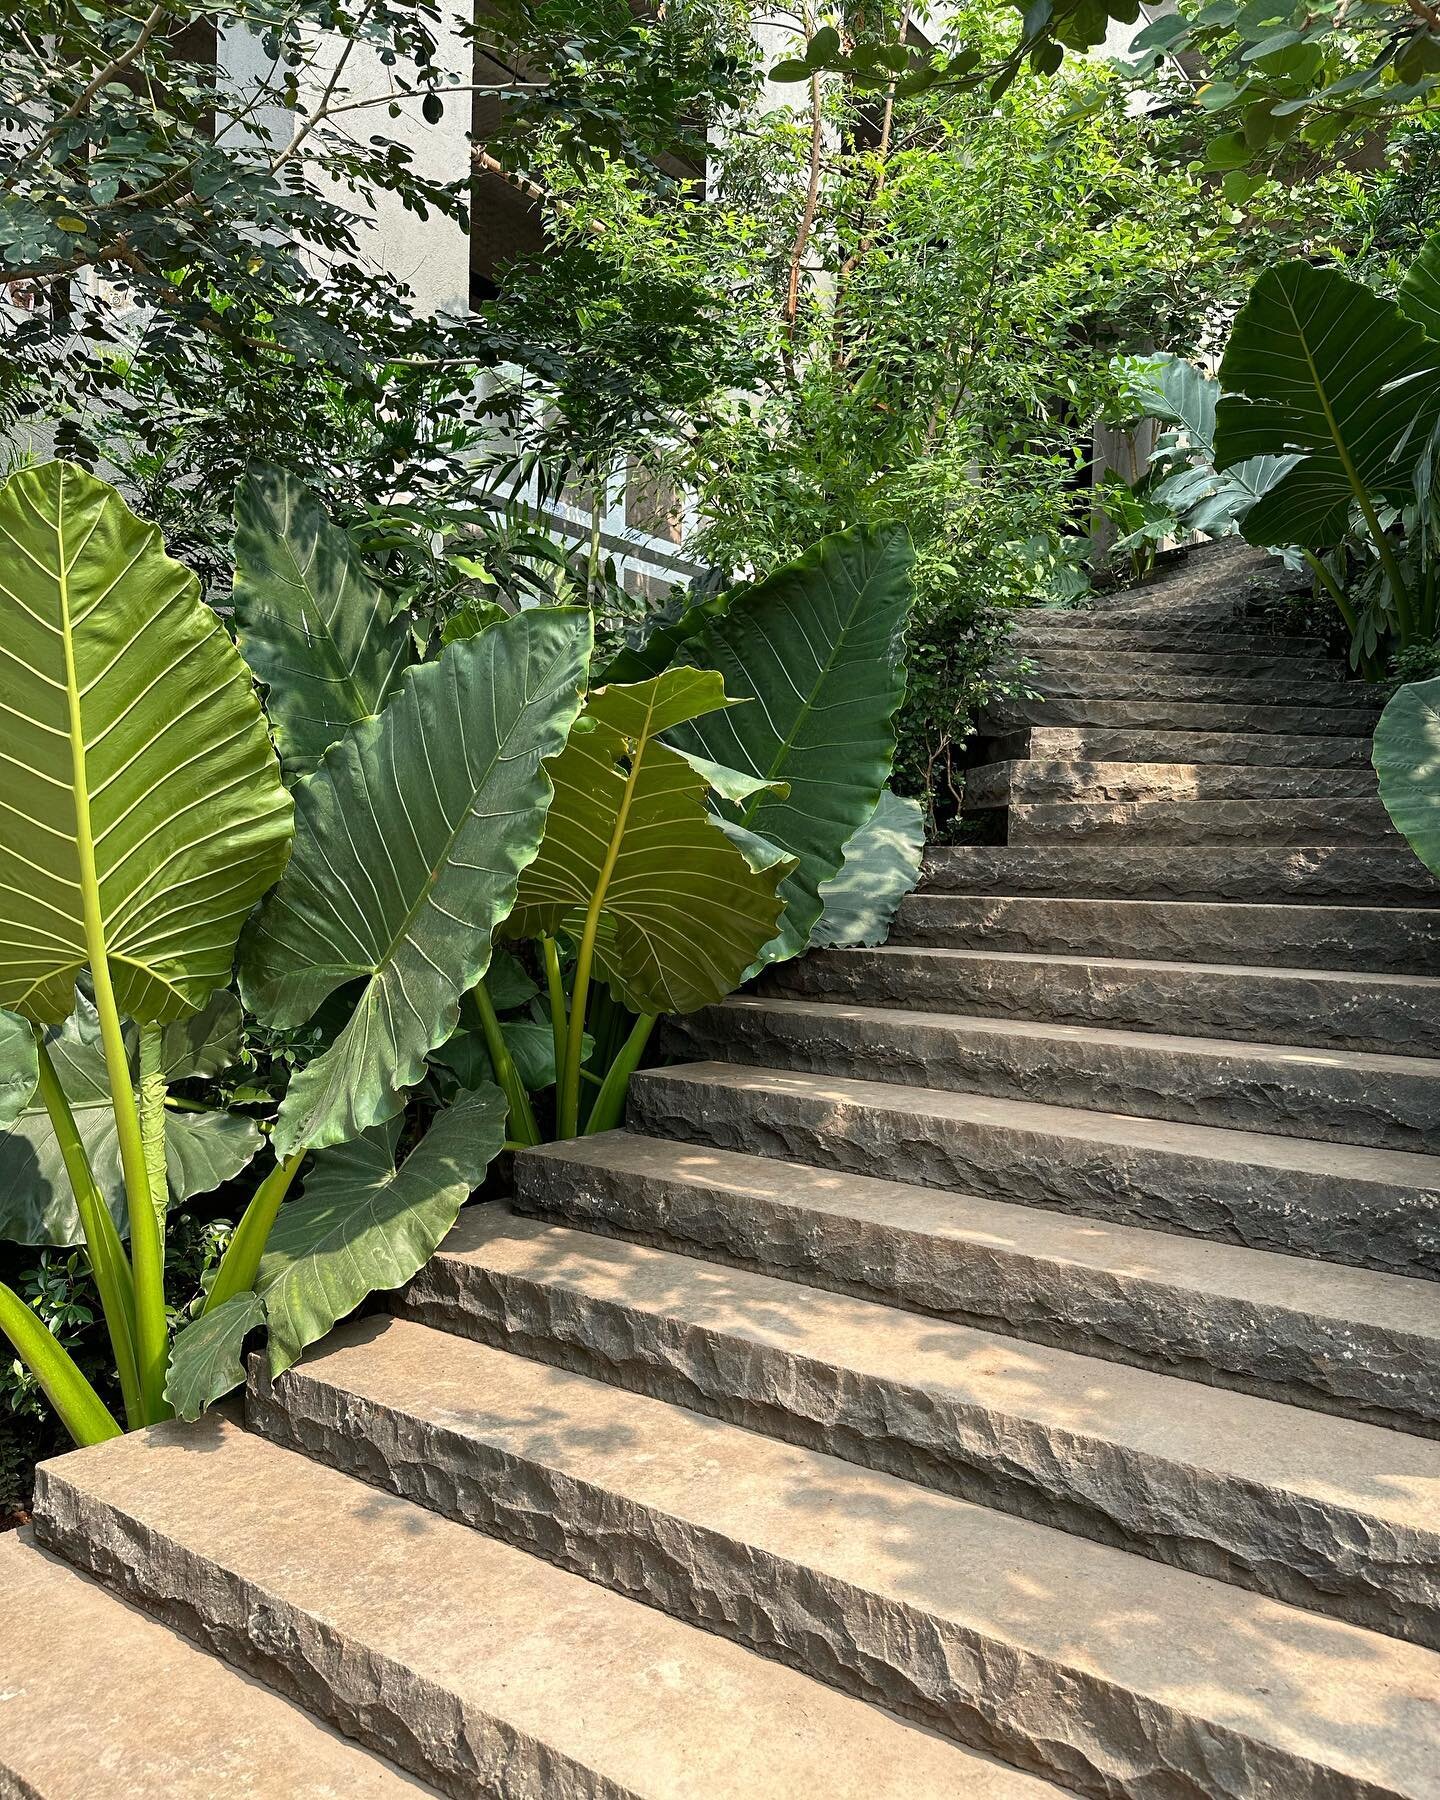 Staircase planting on this Alibaug, Maharastra property. Construction ongoing but the planting looking lush after the monsoon. 
In collab with @casedesign.in  and @jemhanbury